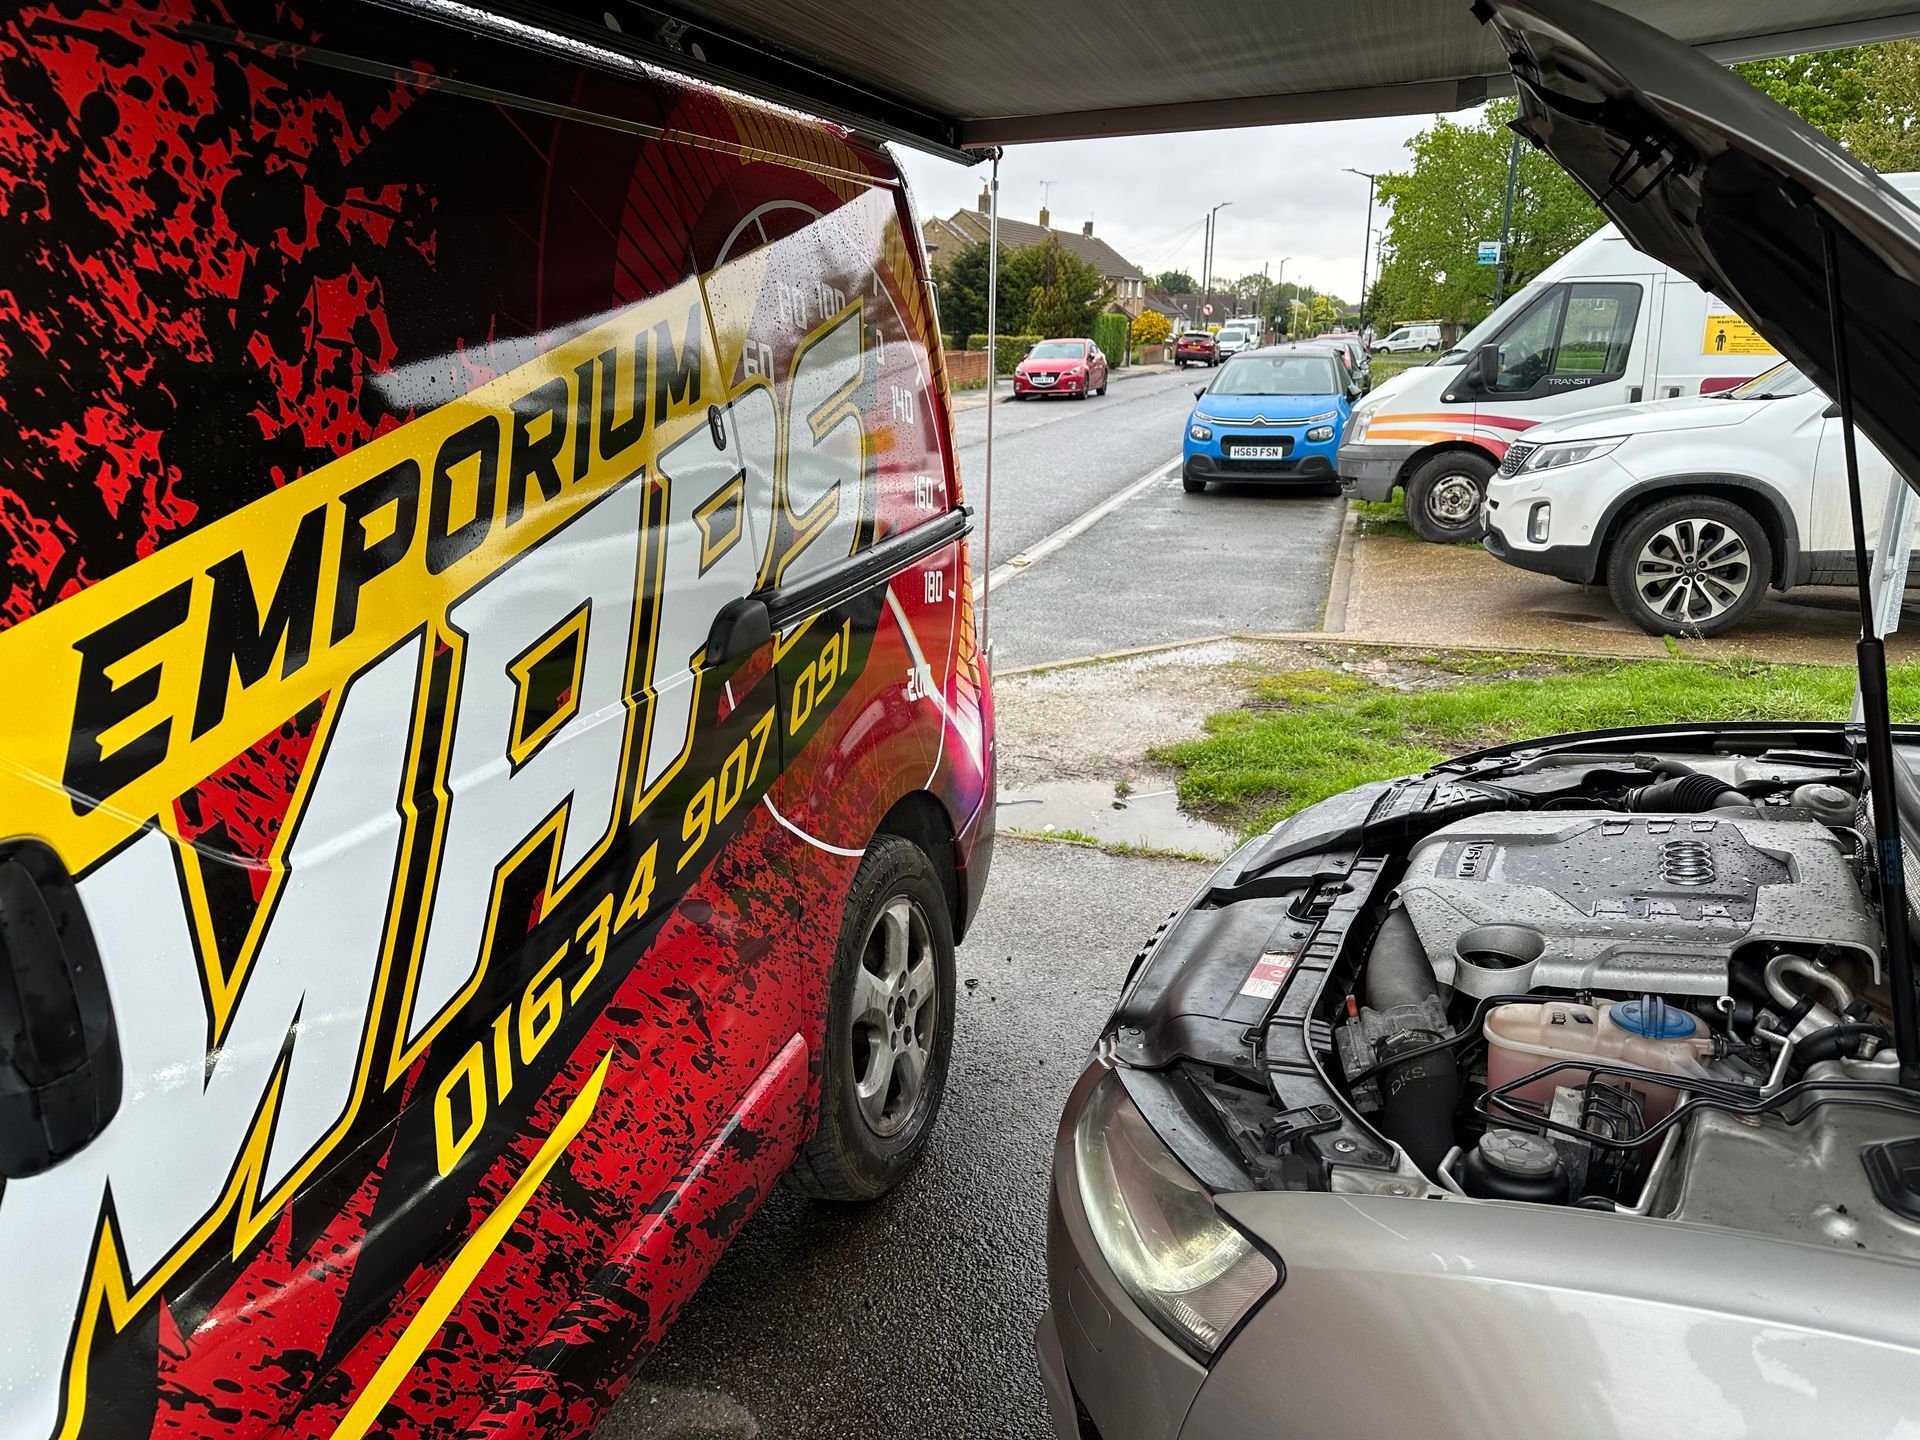 A red and white van with the word emporium on it is parked next to a car with its hood open.